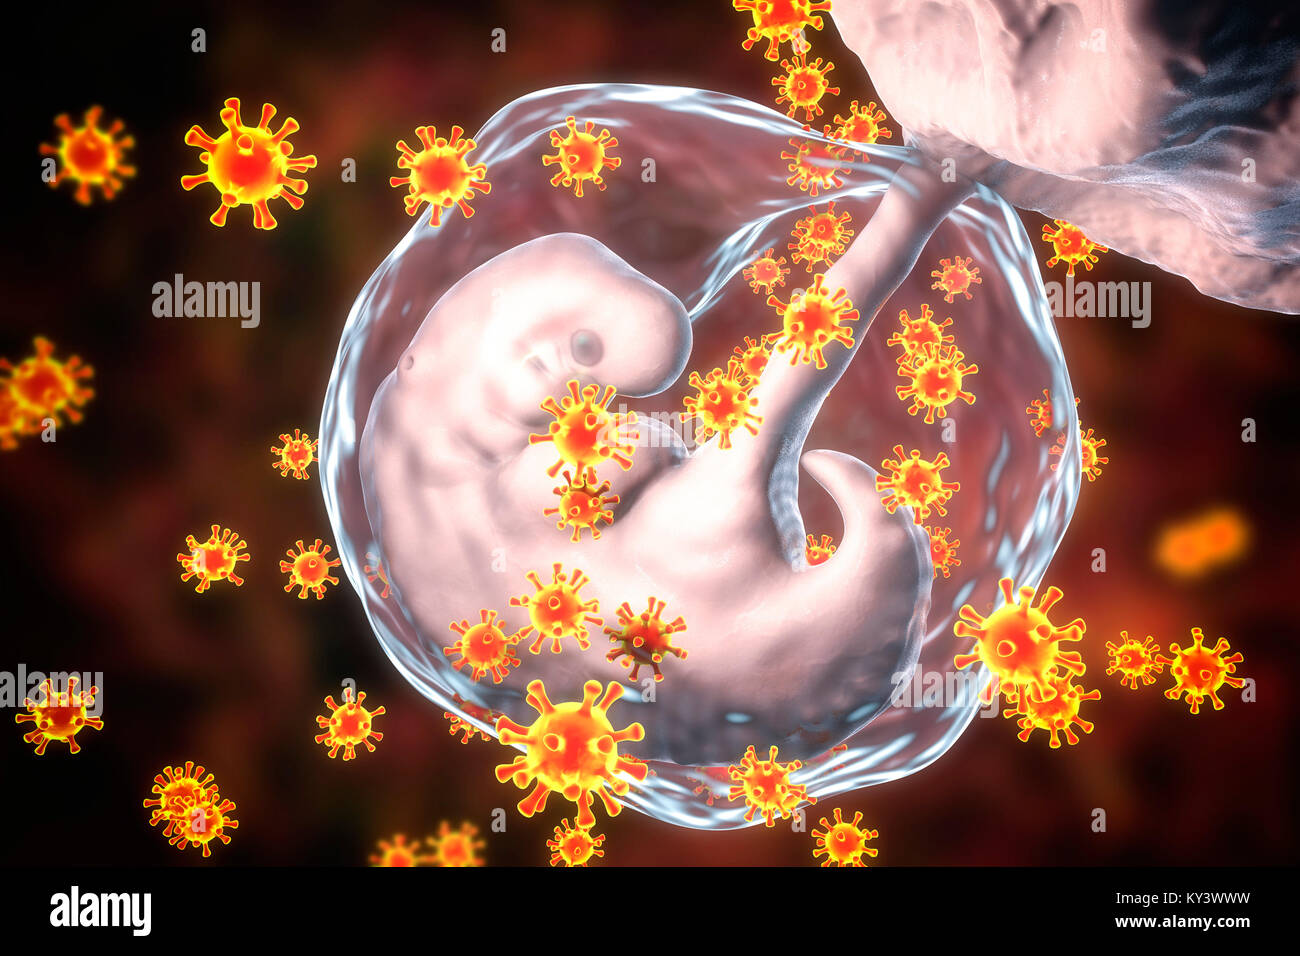 Viruses infecting human embryo, conceptual illustration. The embryo is 4 weeks old. Many viruses cause fetal abnormalities or stillbirth. For example, rubella, herpes and cytomegalovirus cause different fetal pathology, whilst fetal measles infection usually leads to stillbirth. Stock Photo